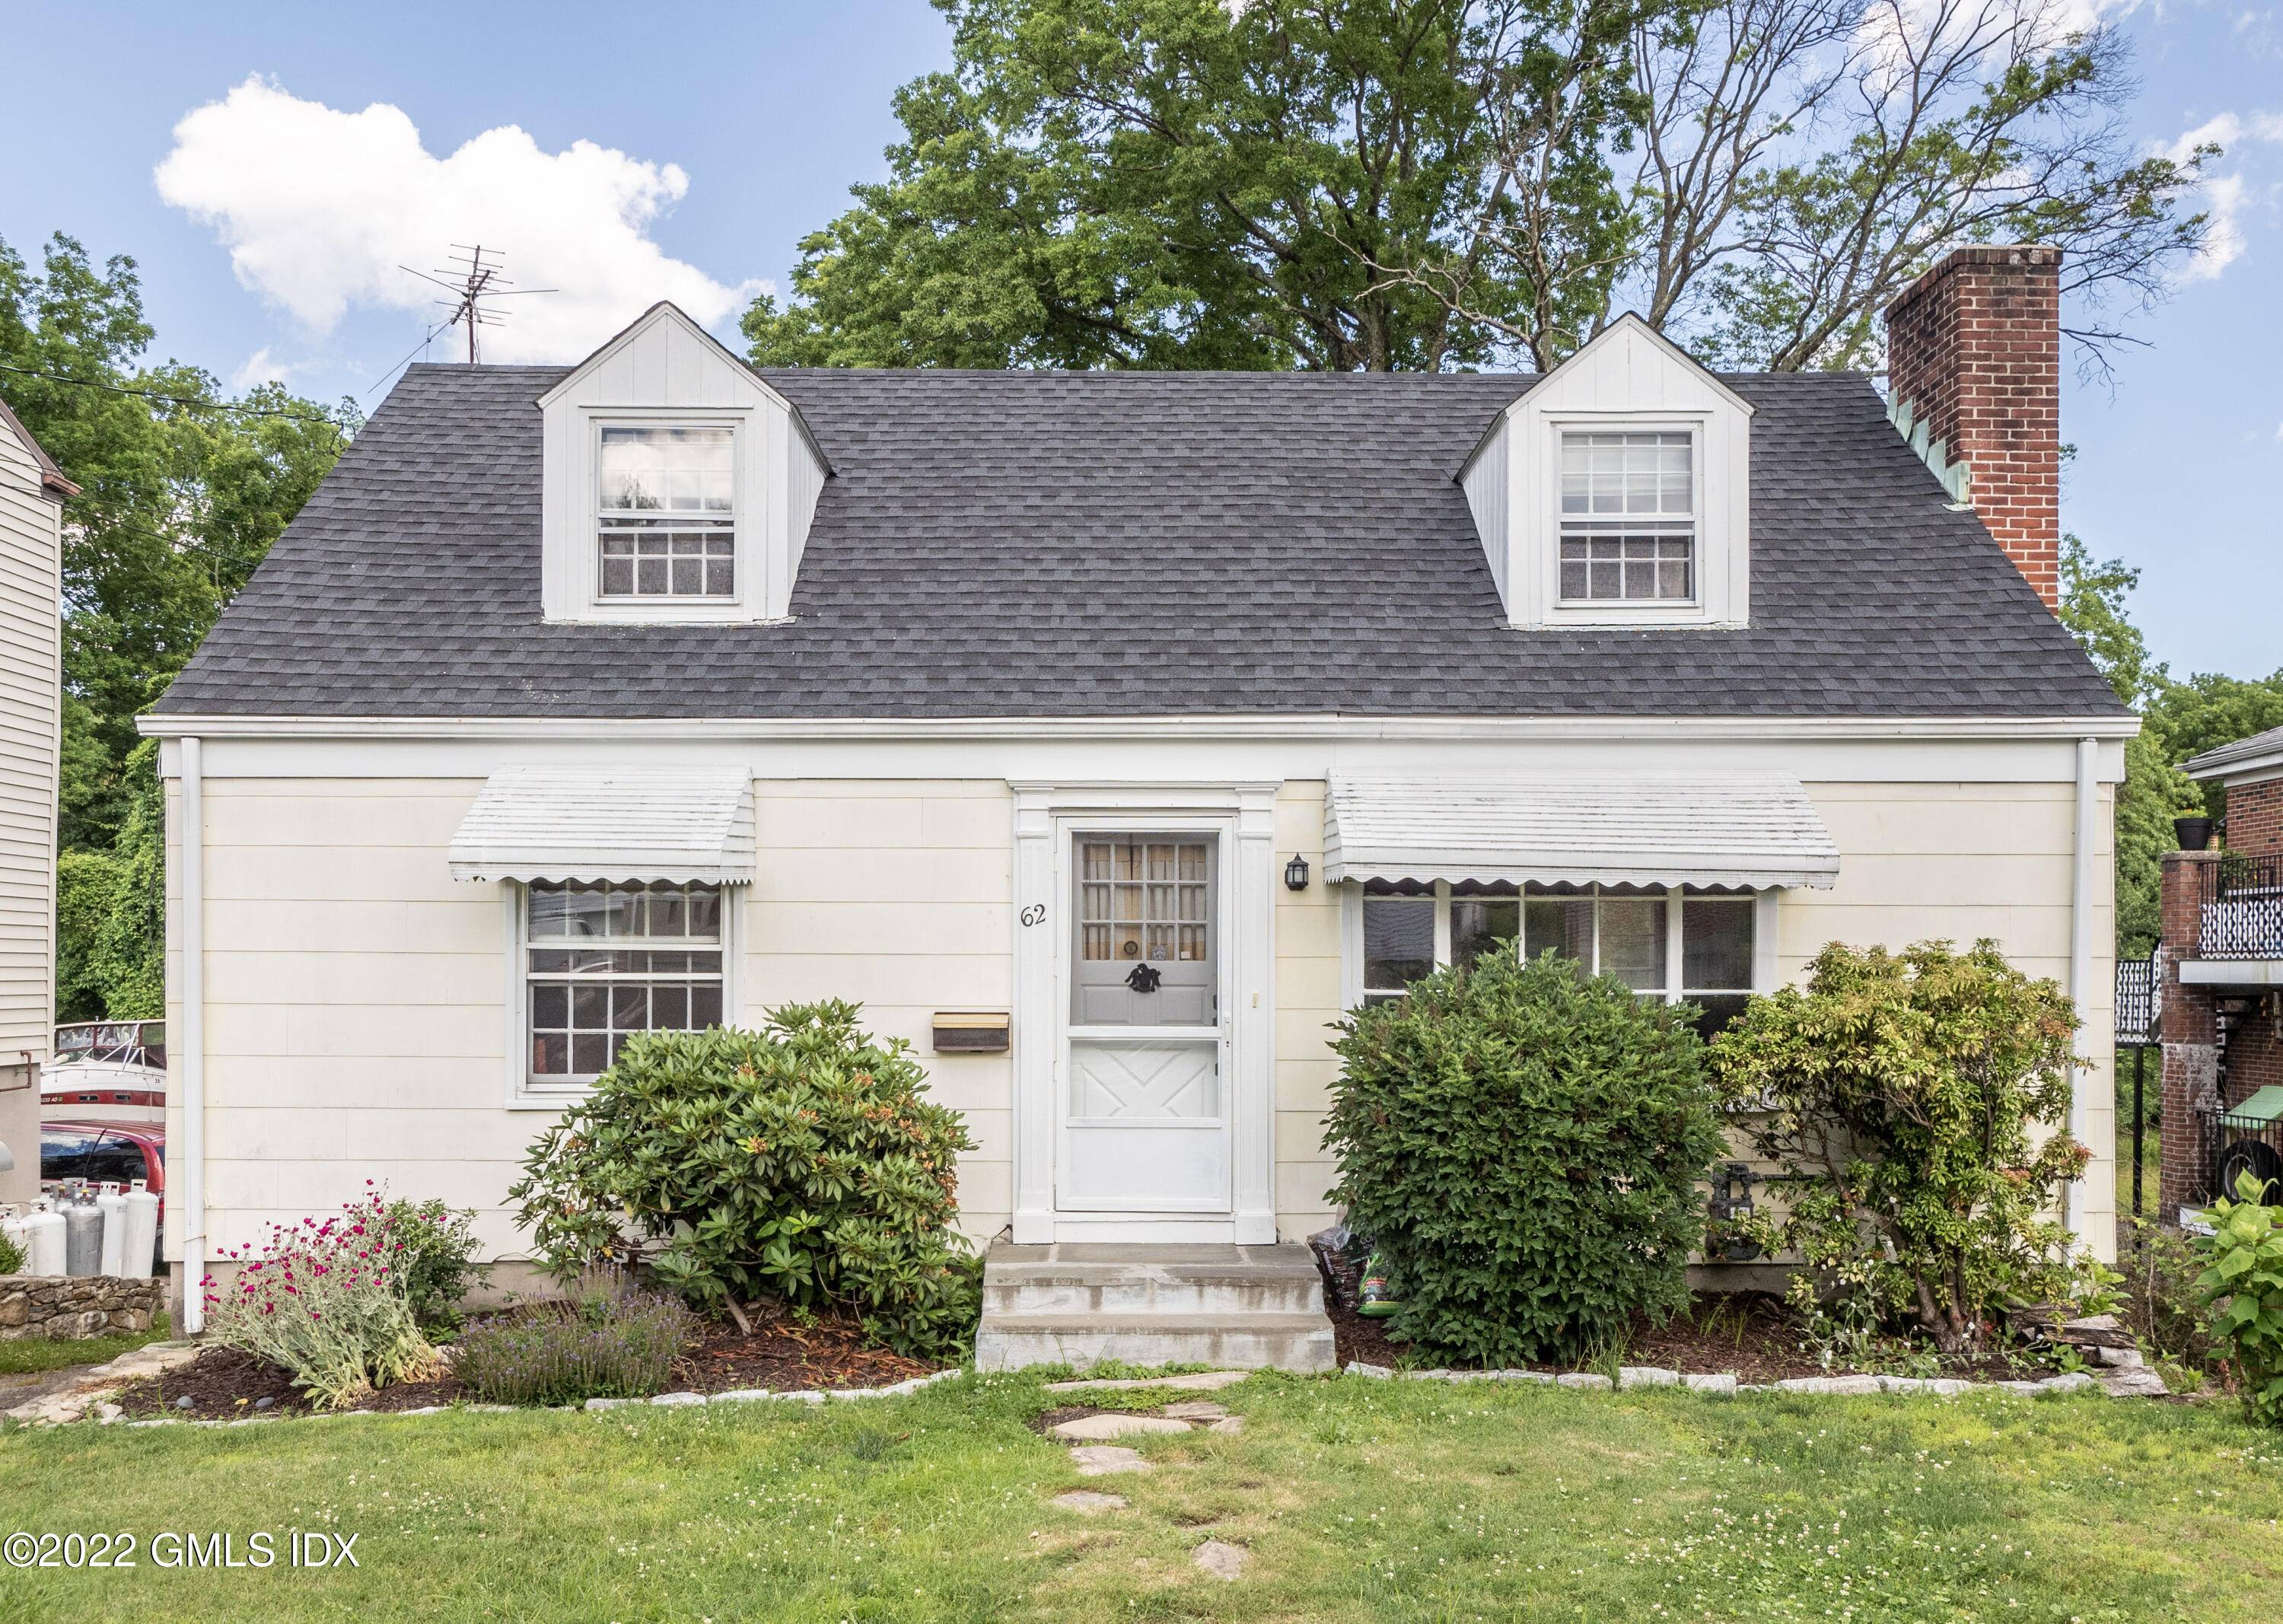 A classic Cape Cod style home just a stone's throw away from the beach.